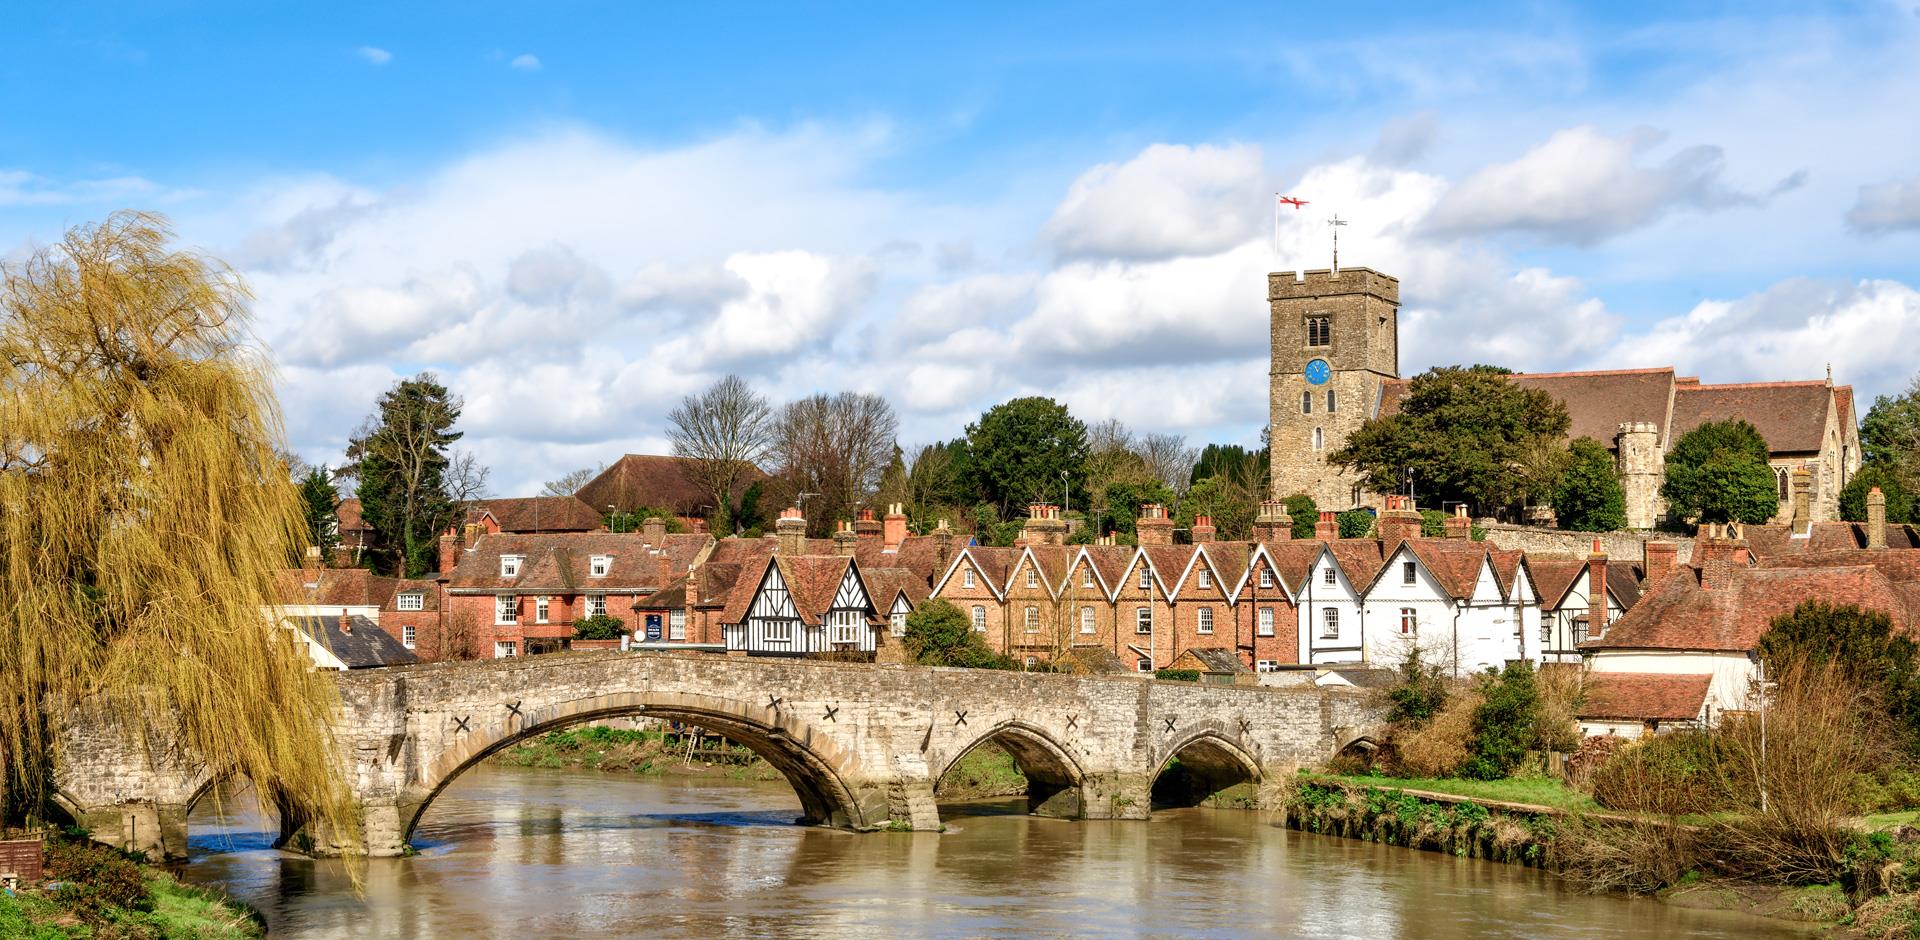 Medieval bridge and church in Aylesford, Kent, England.